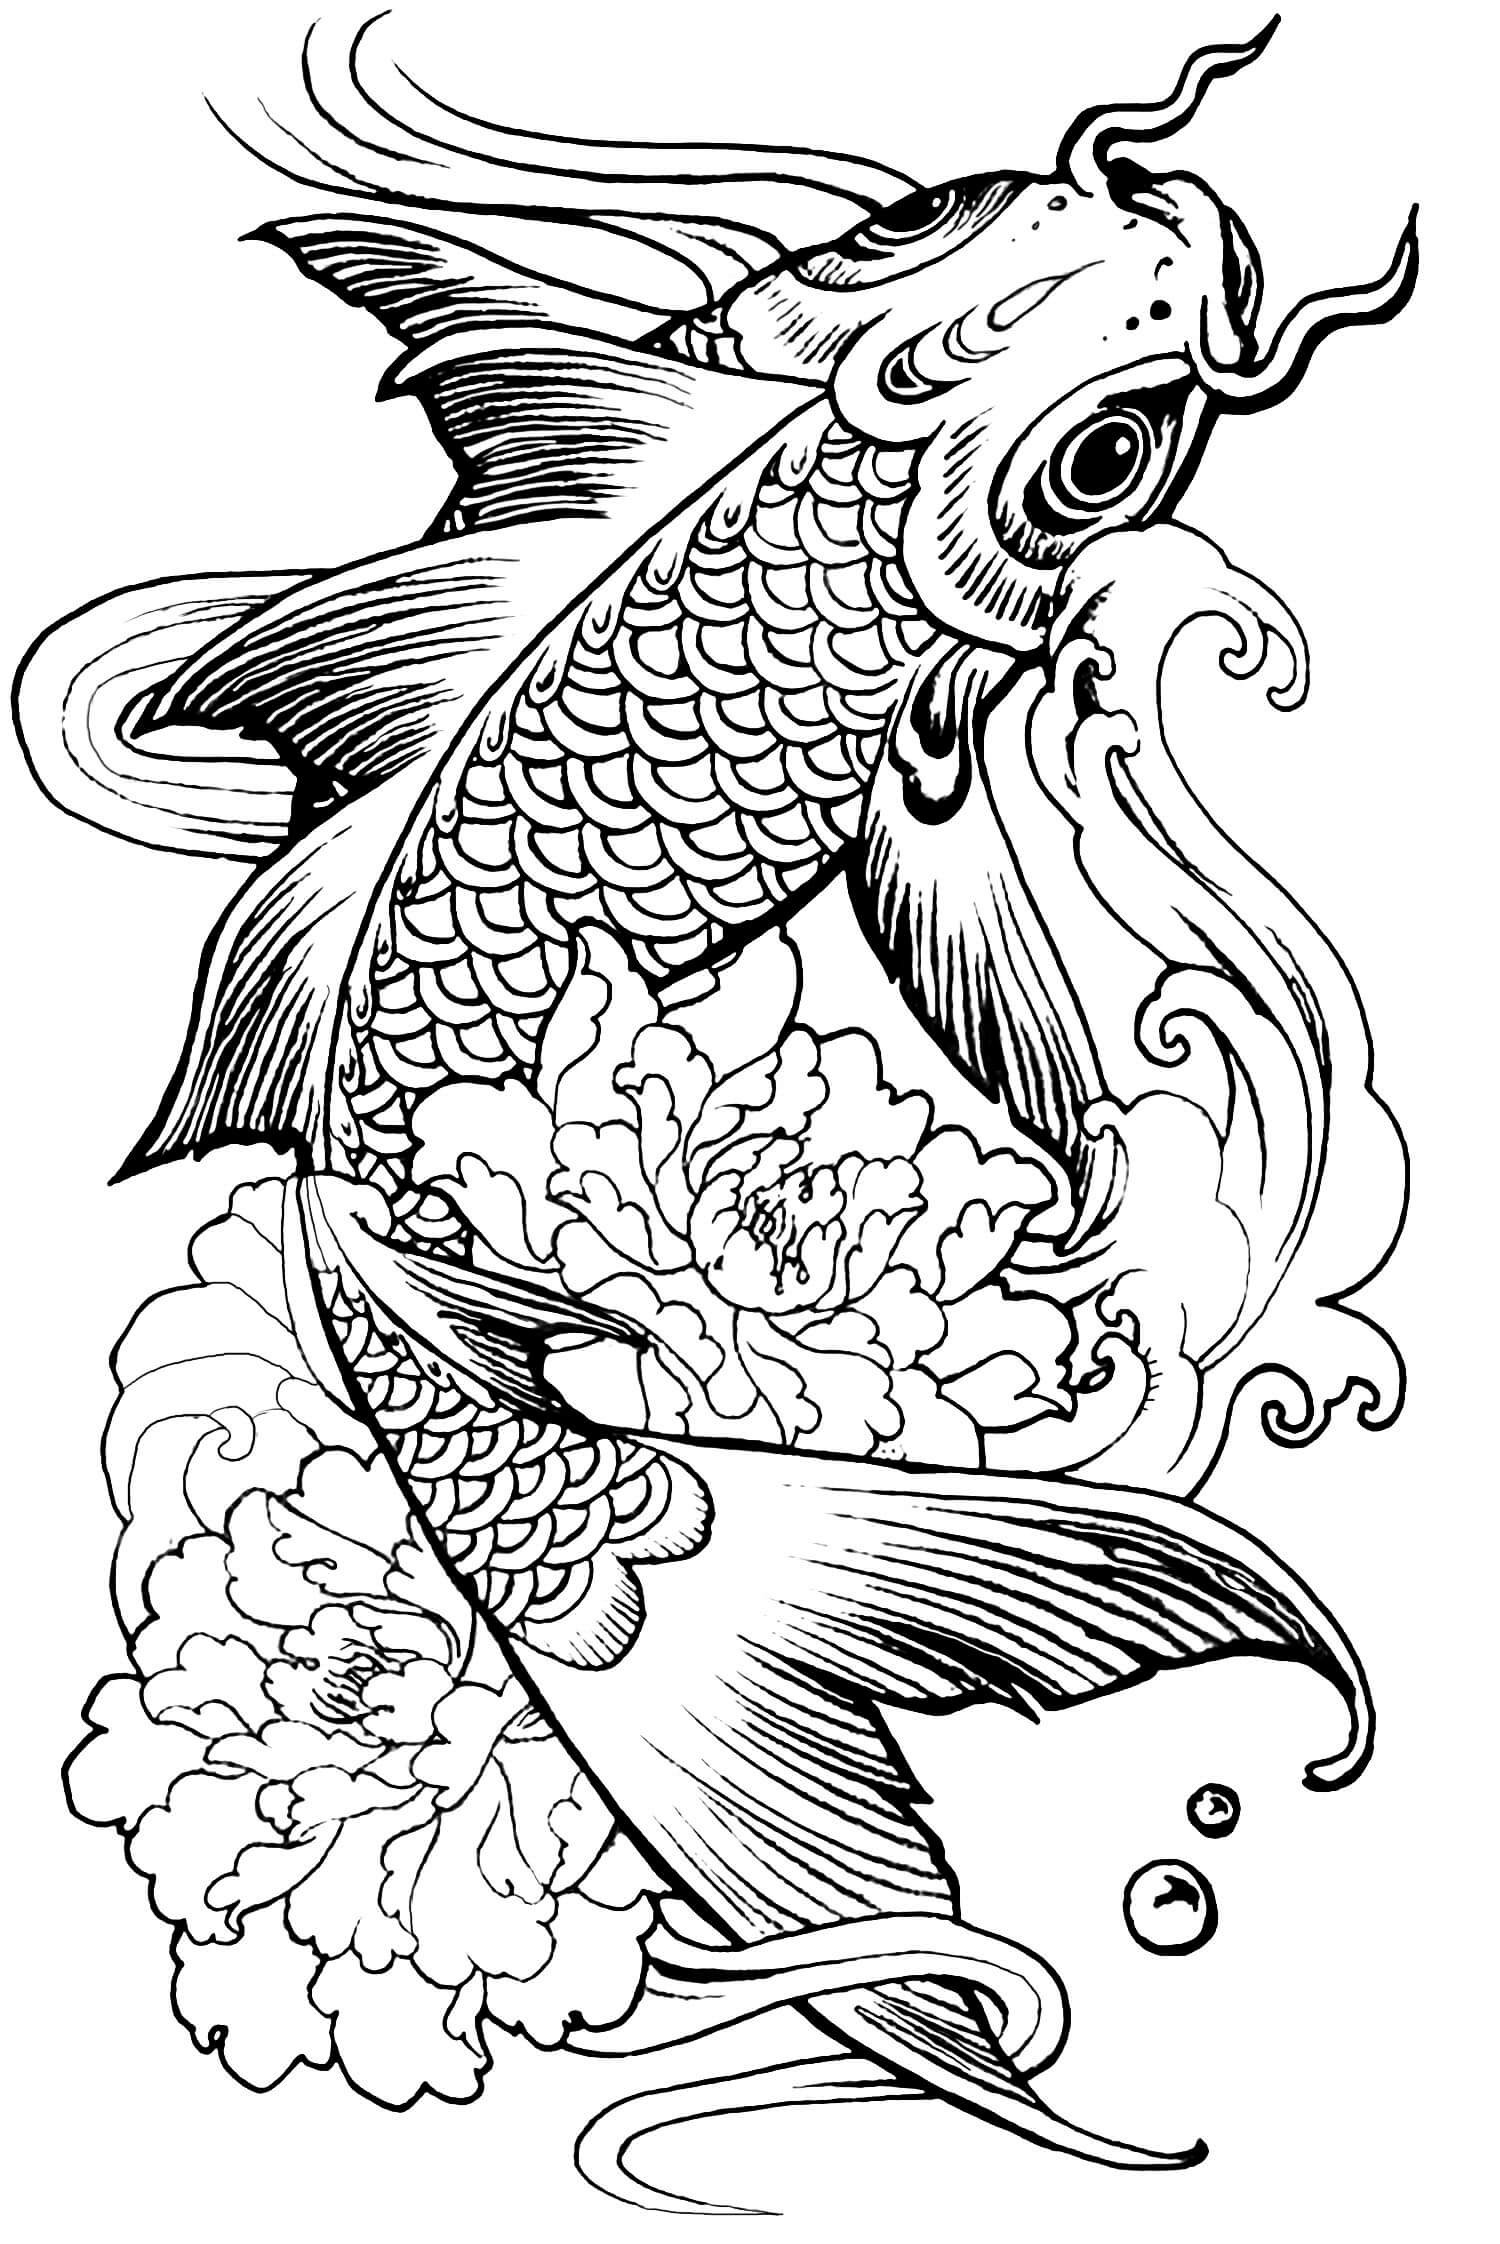 Animal Coloring Pages For Adults
 Animal Coloring Pages Best Coloring Pages For Kids